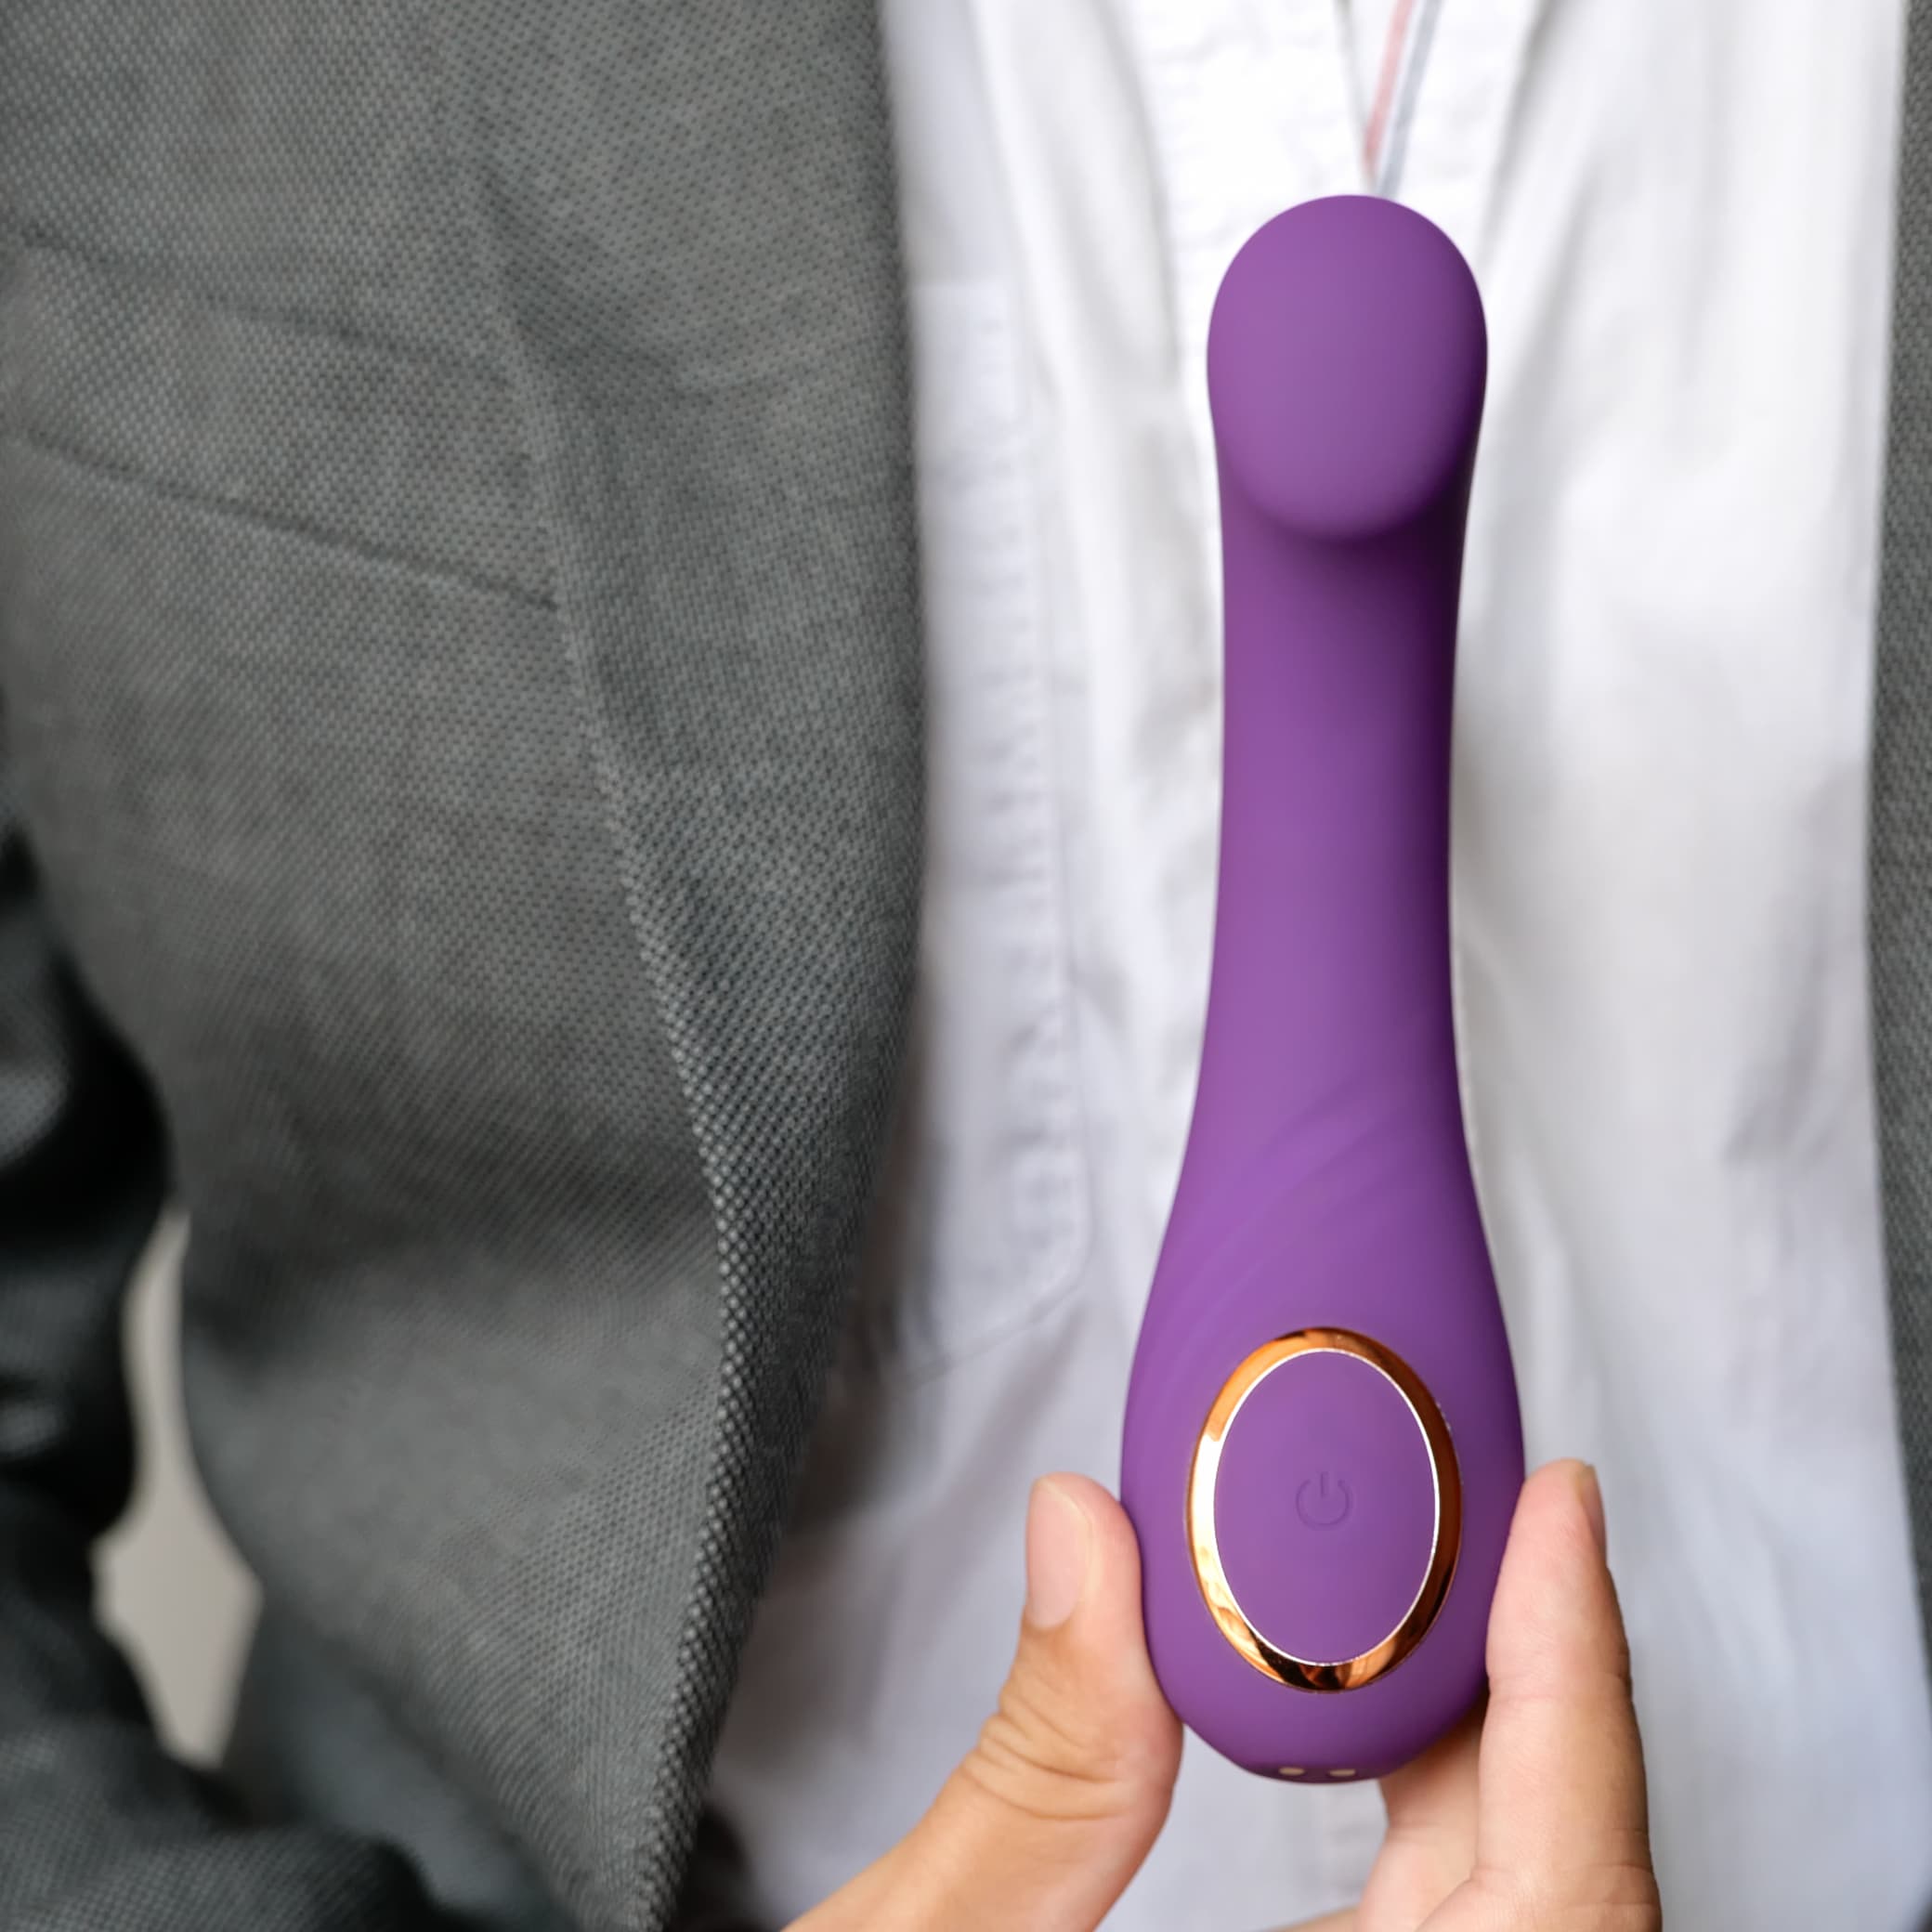 libertee-luna-full-body-electric-massager-flexible-12-modes-variations-waterproof-rechargeable-violet